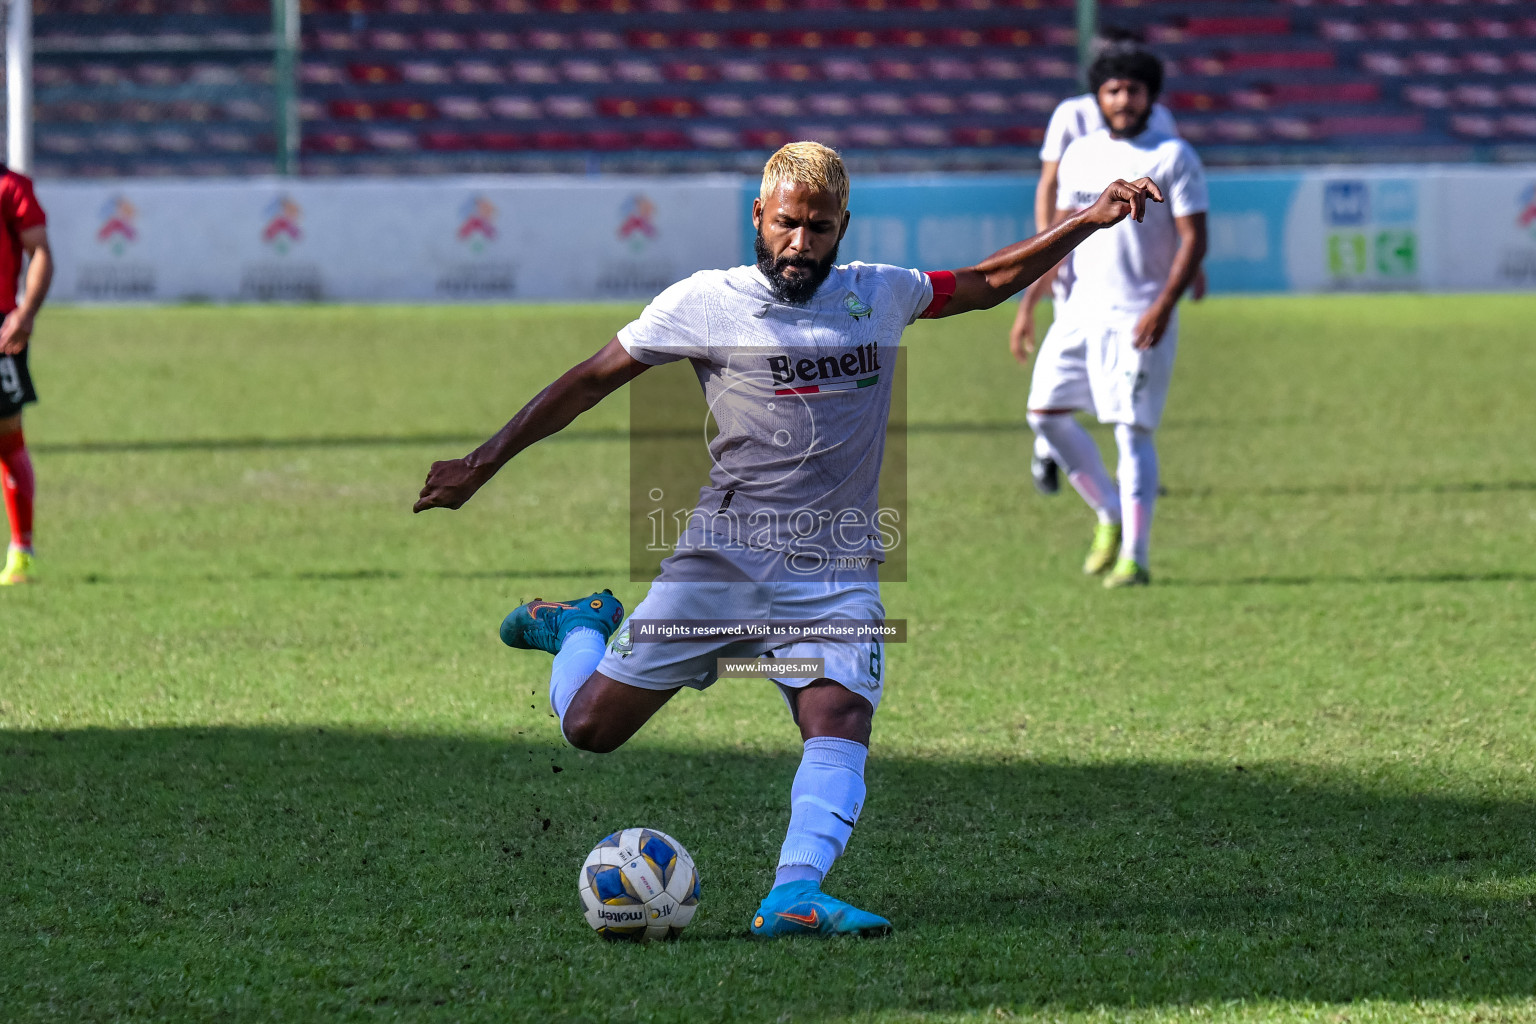 Club Green Streets vs TC Sports Club in the FA Cup 2022 on 13th Aug 2022, held in National Football Stadium, Male', Maldives Photos: Nausham Waheed / Images.mv